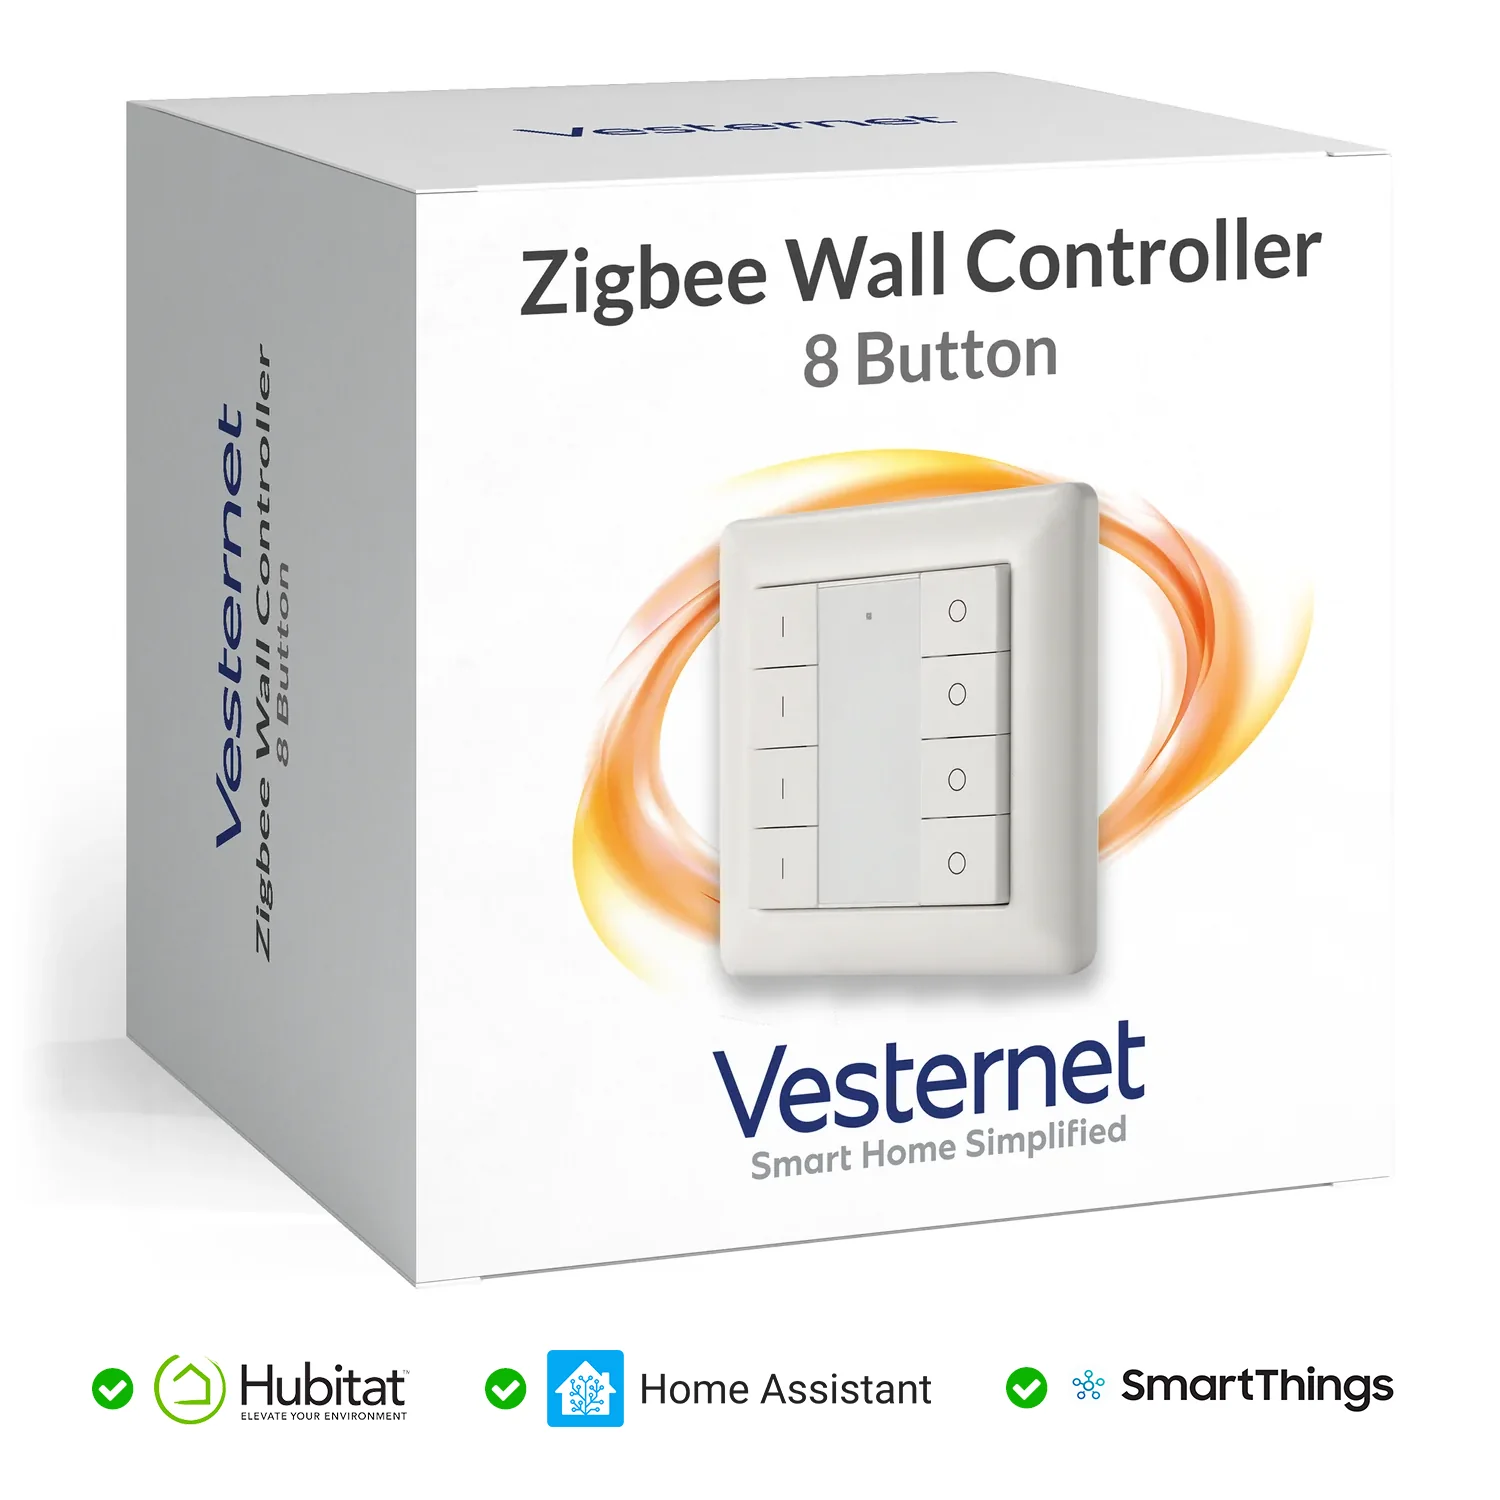 Vesternet Zigbee Wall Controller - 8 Button Questions & Answers